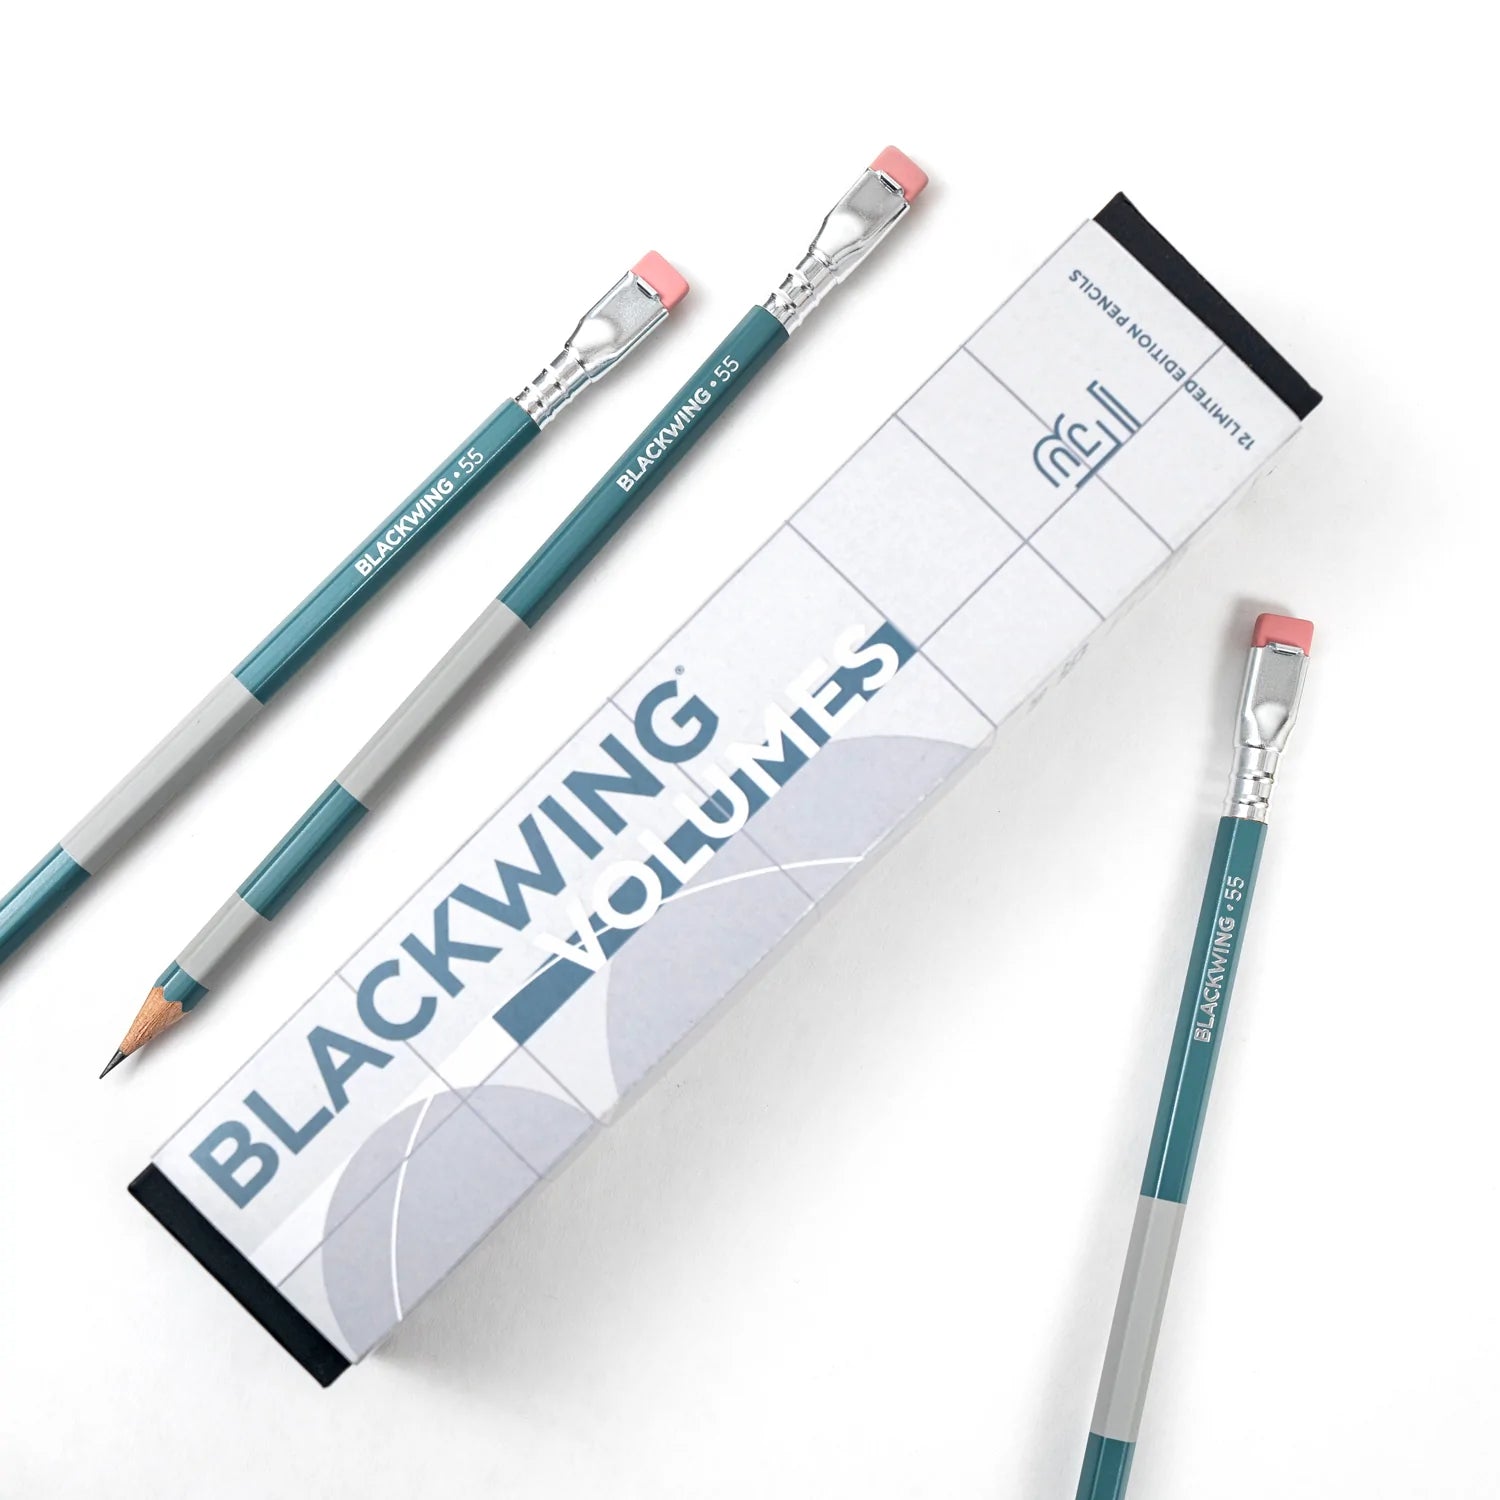 BLACKWING×Independent Bookstore Day-1ダース - 筆記具